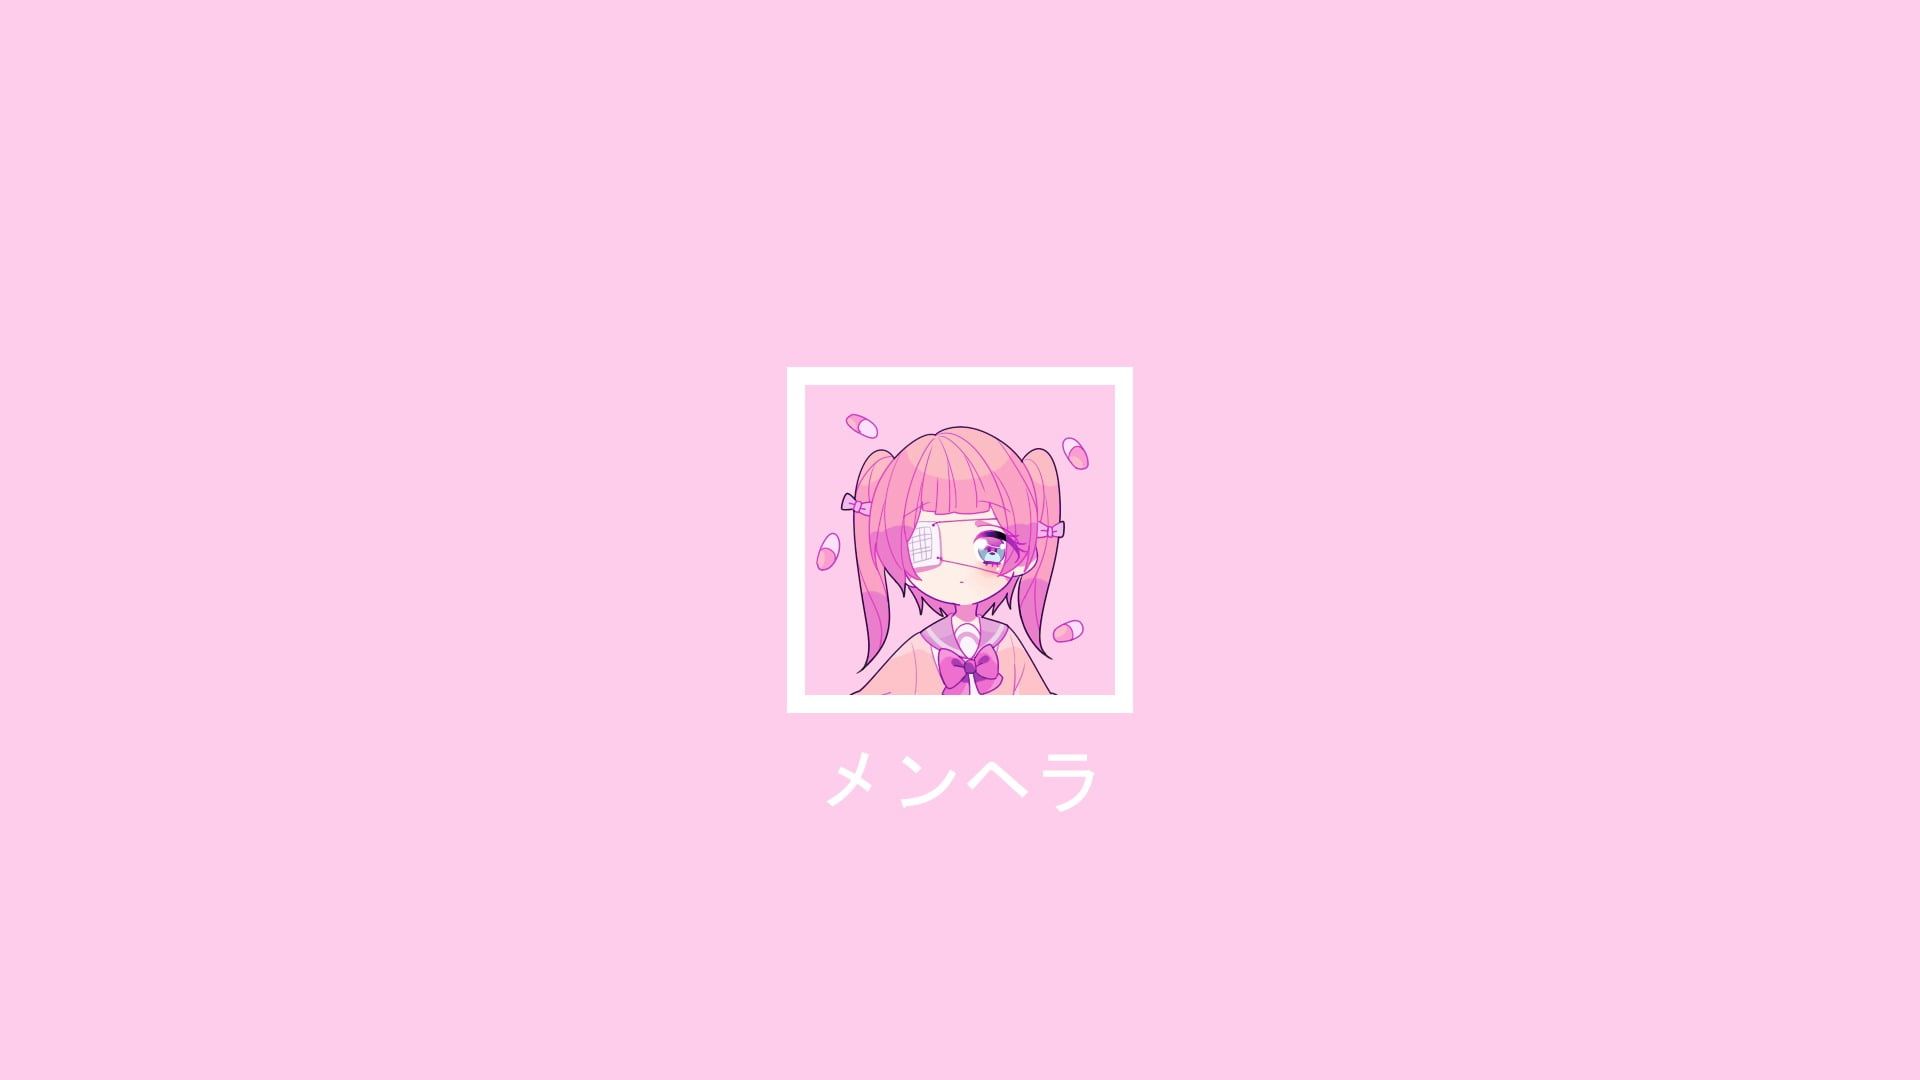 Kawaii Pink Aesthetic Desktop Wallpapers On Wallpaperdog The skin that you're in is all soft now. kawaii pink aesthetic desktop